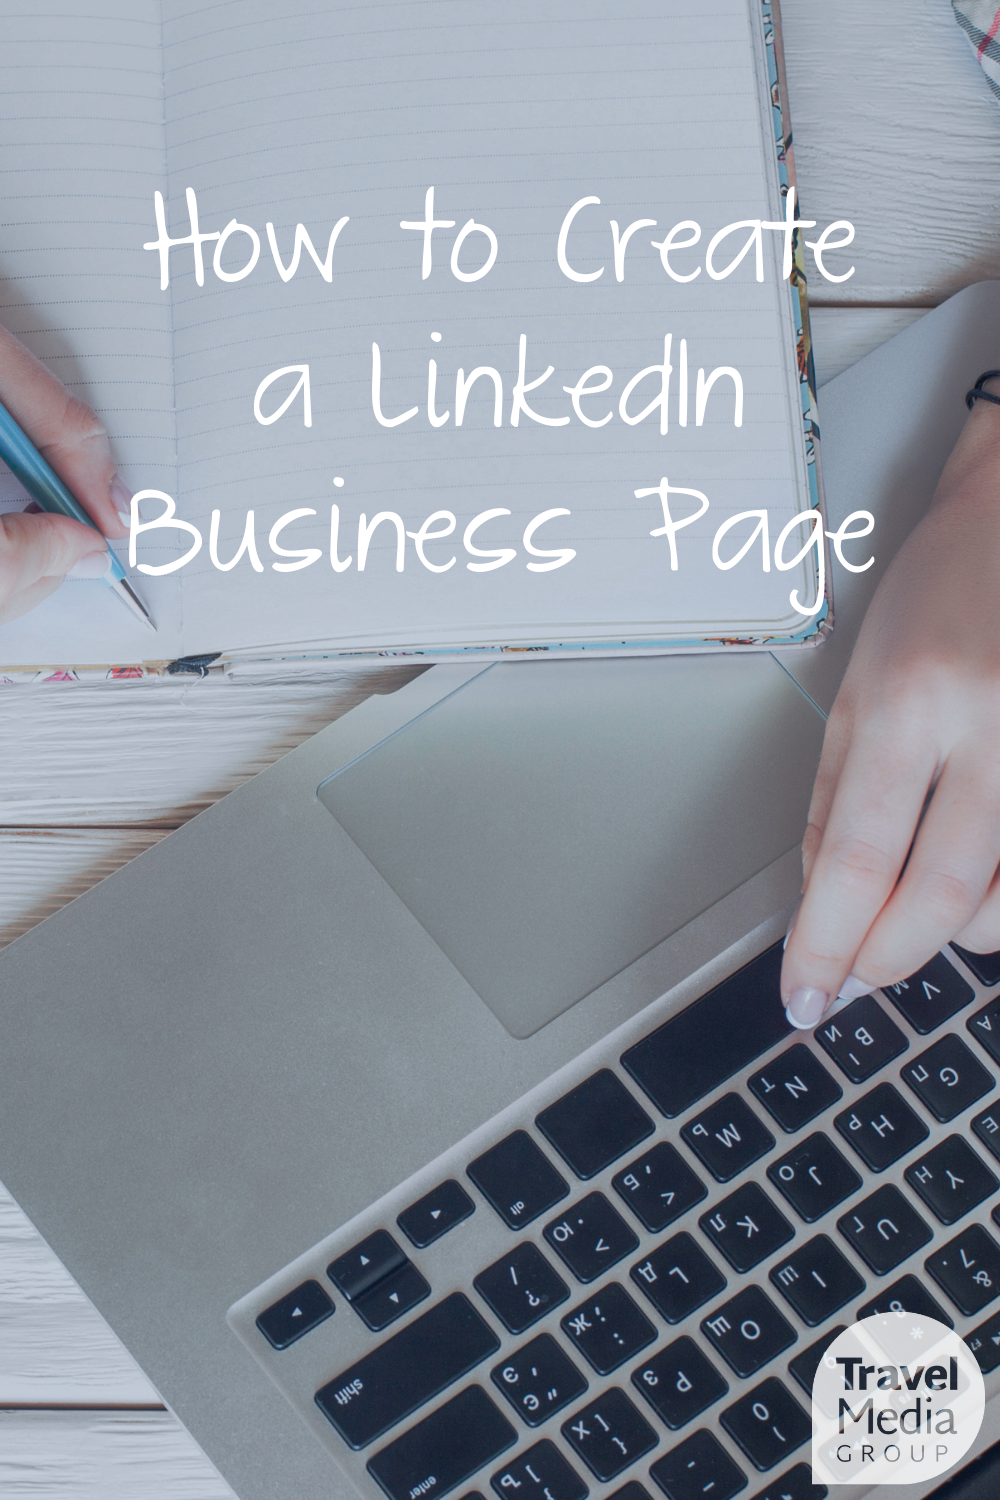 Getting a LinkedIn Business page is pivotal to your marketing strategy. Our blog walks you through how to get going.